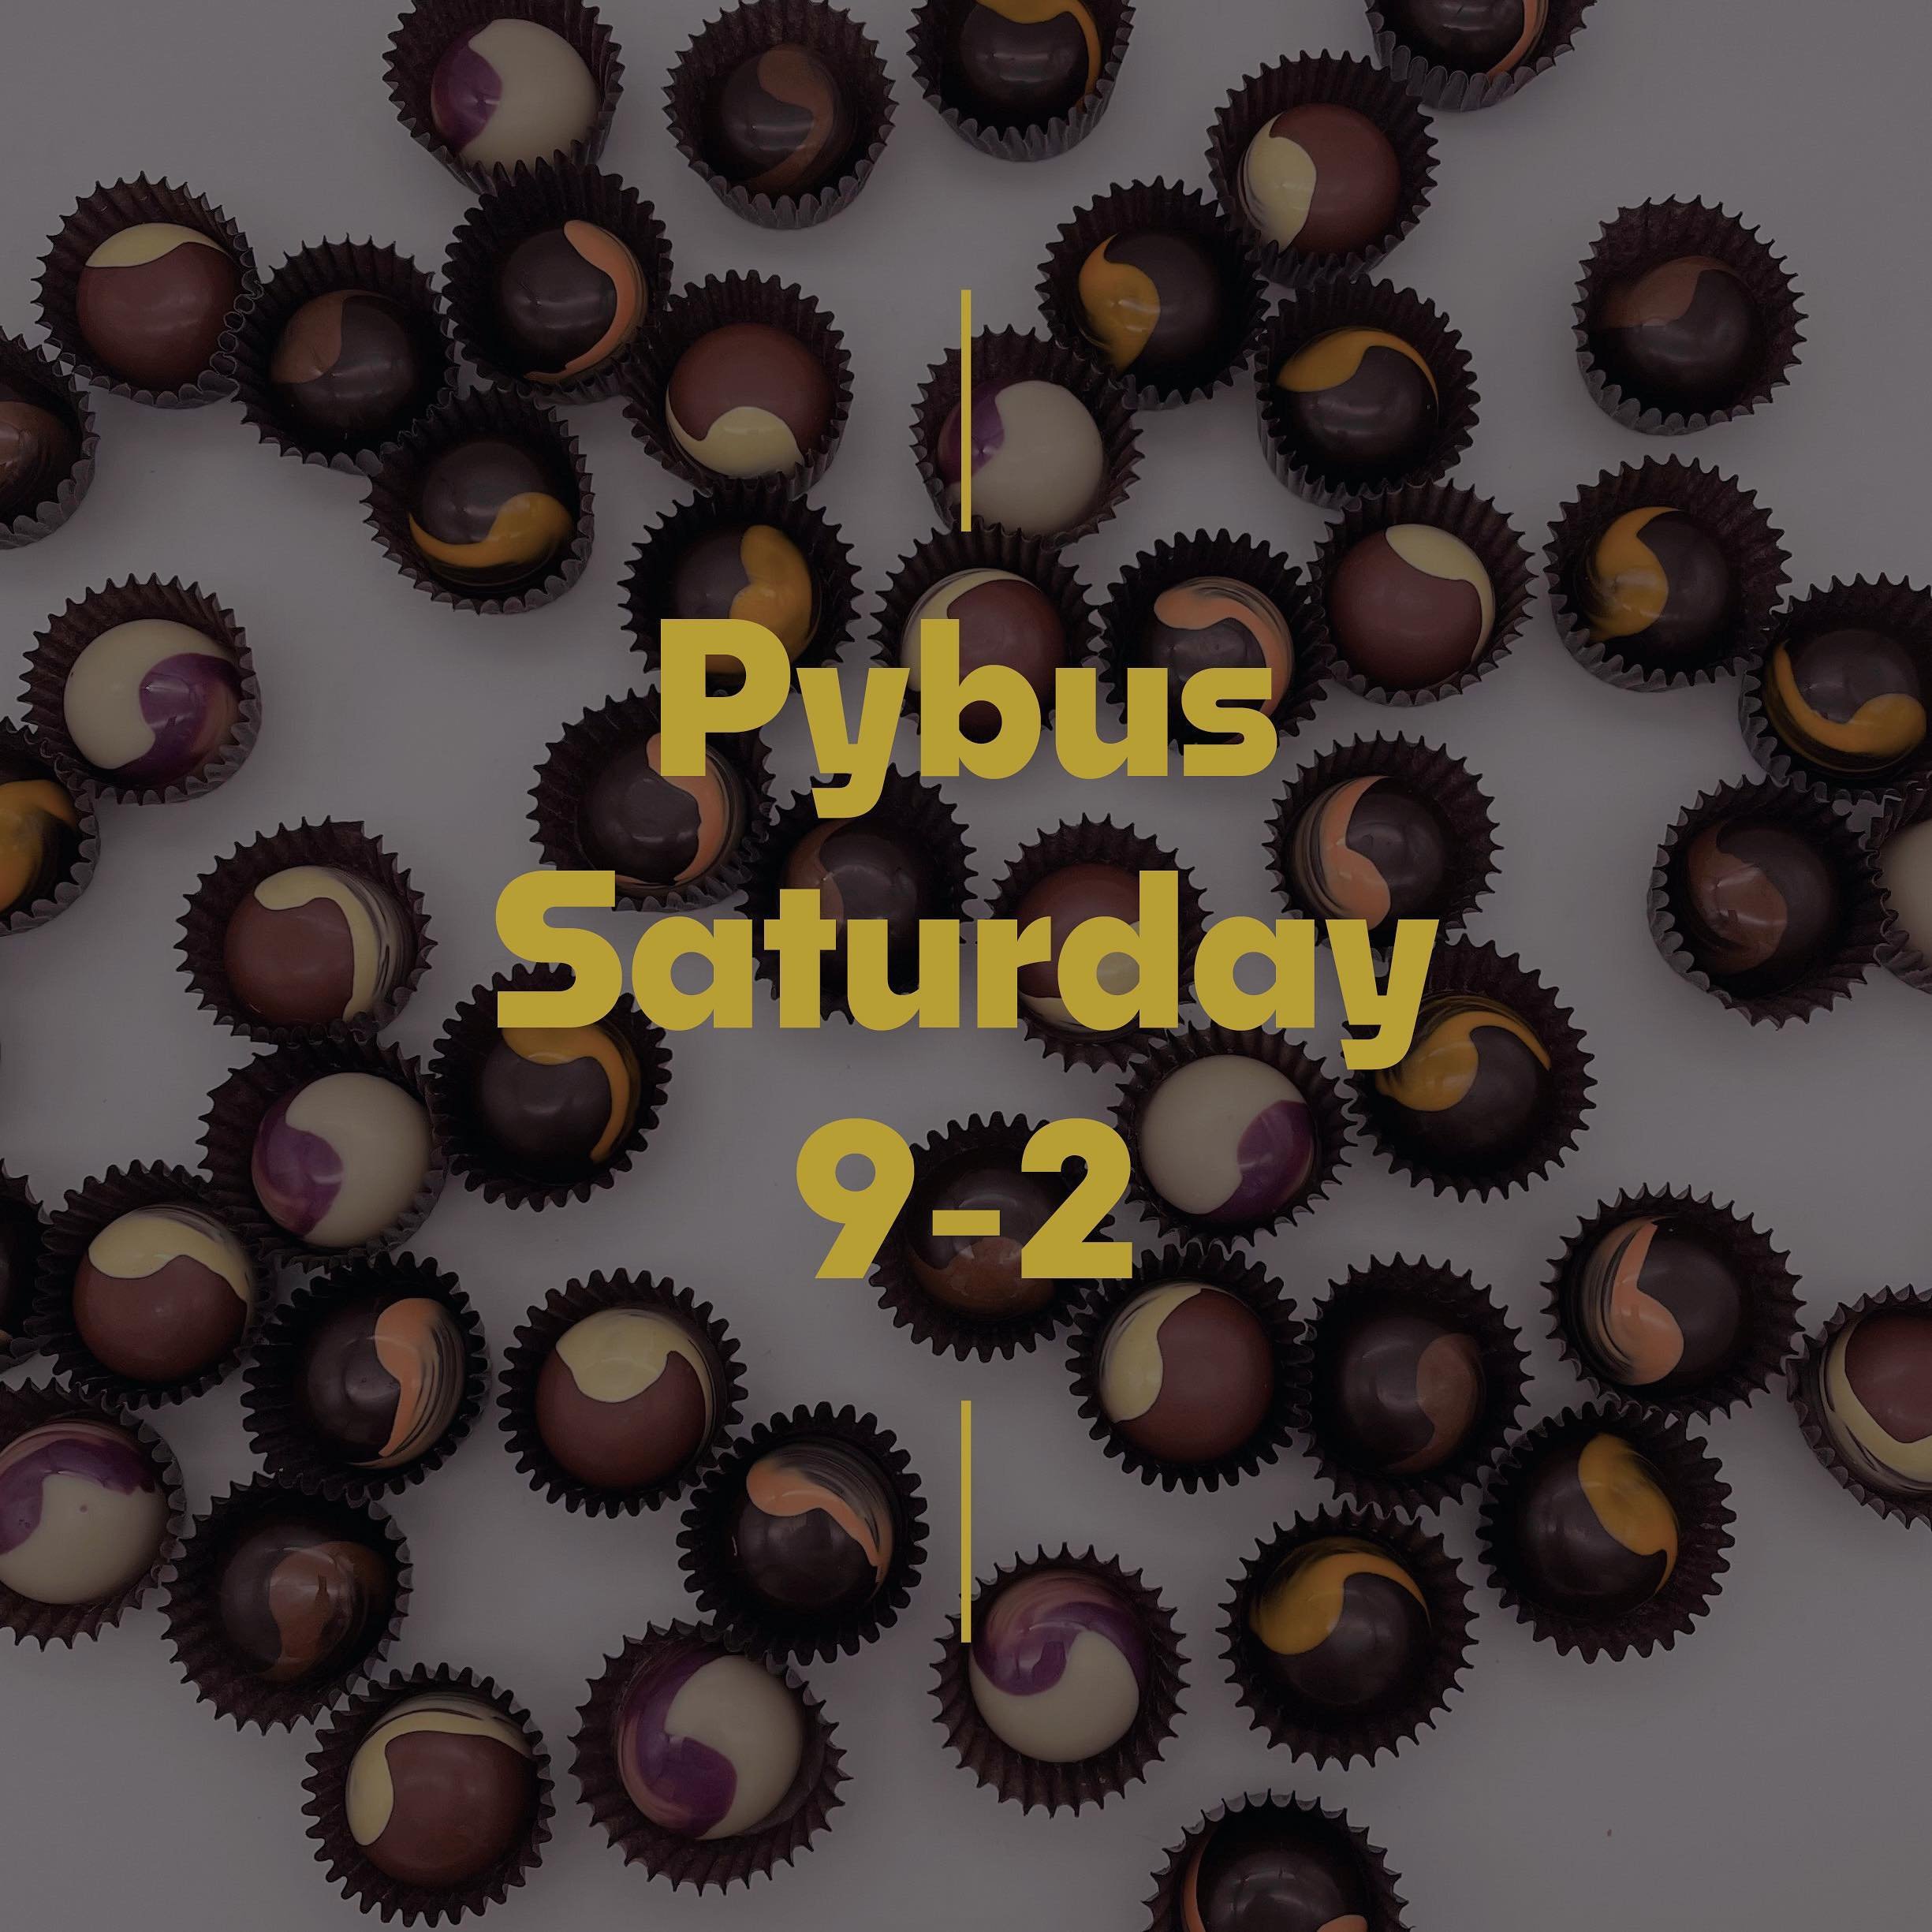 Alright Wenatchee fans, don&rsquo;t sleep on me here! This is the ONE AND ONLY market I&rsquo;m doing @pybuspublicmarket this month, so take some time out of your Apple Blossom schedule and head down to Pybus to get these Mother&rsquo;s Day chocolate